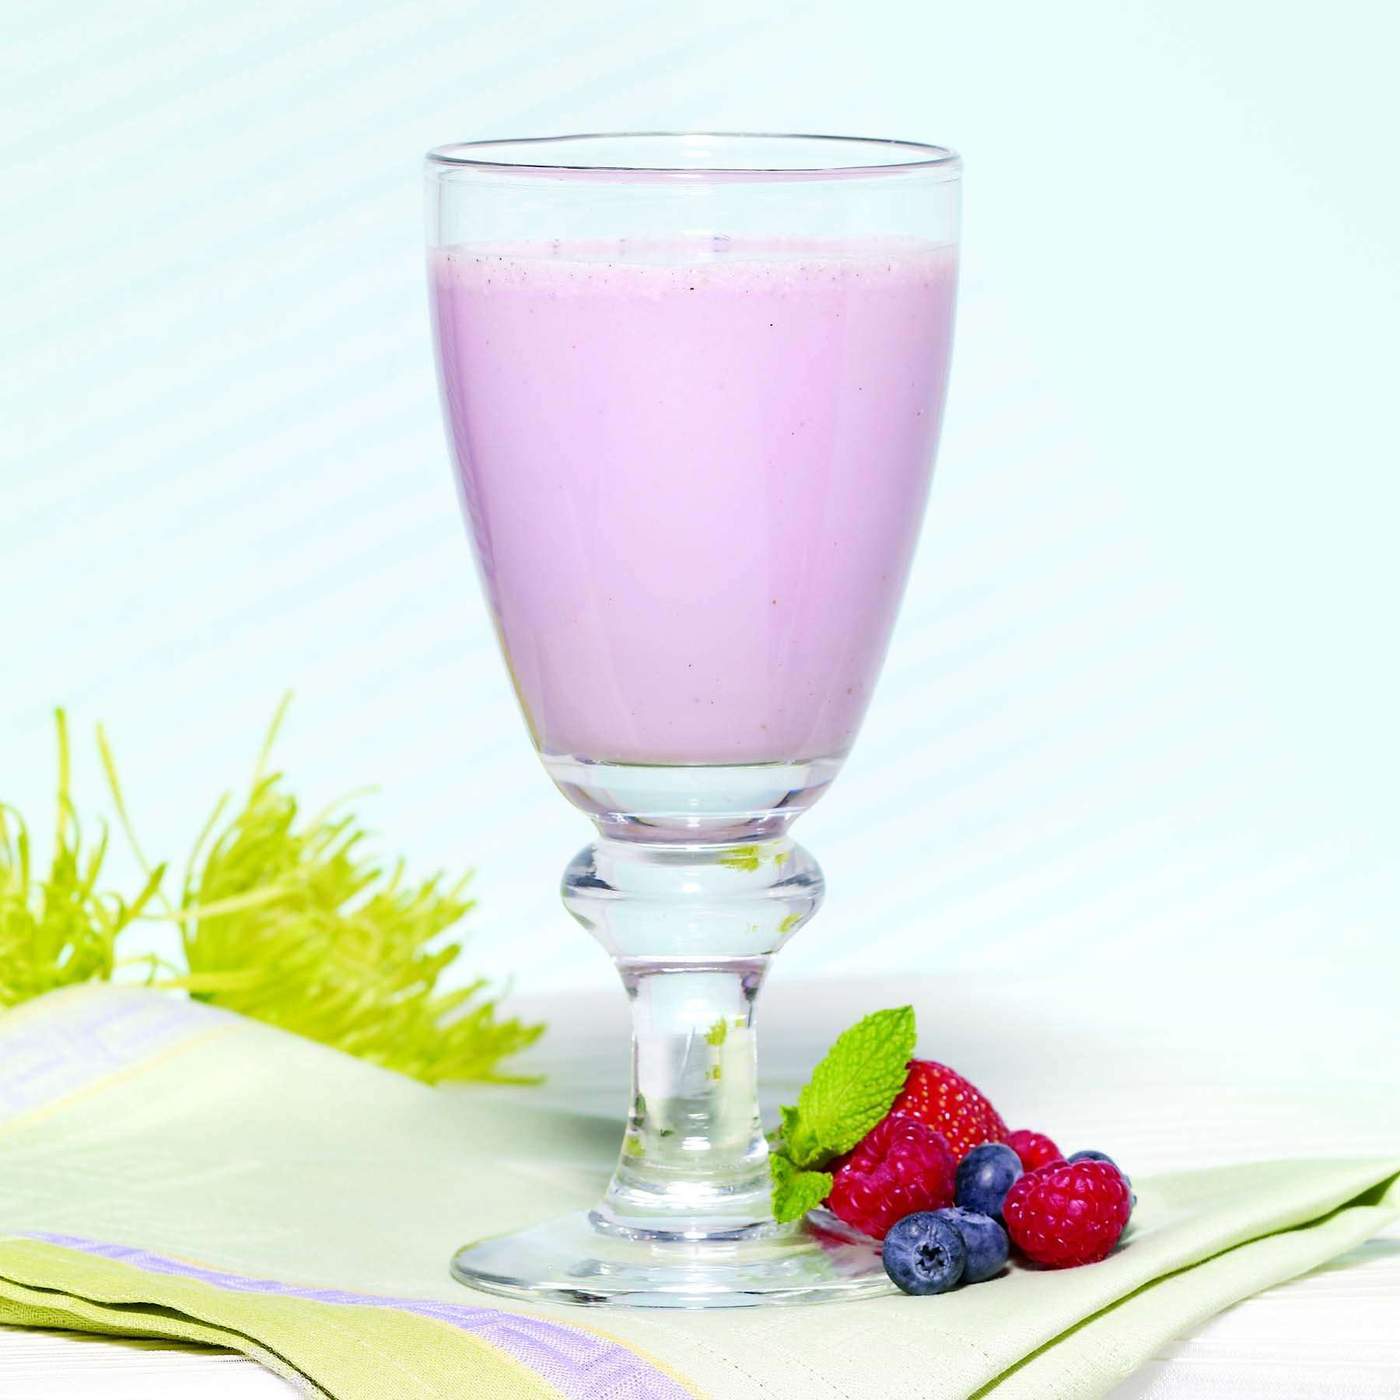 BestMed Weight Loss Berry Creme Smoothie Image